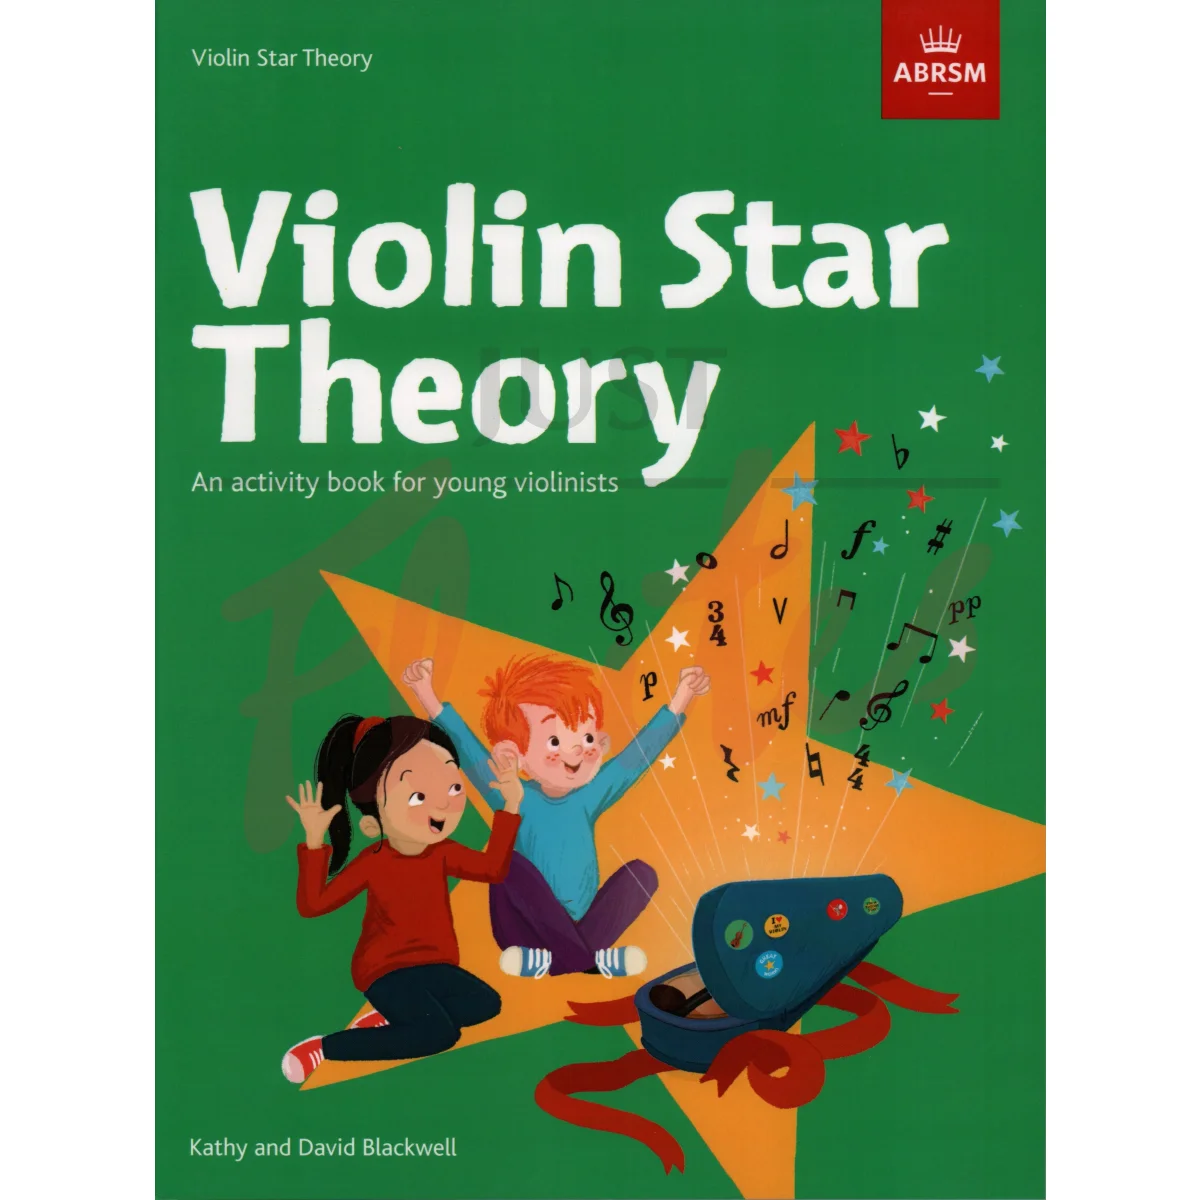 Violin Star Theory - An Activity Book for Young Violinists